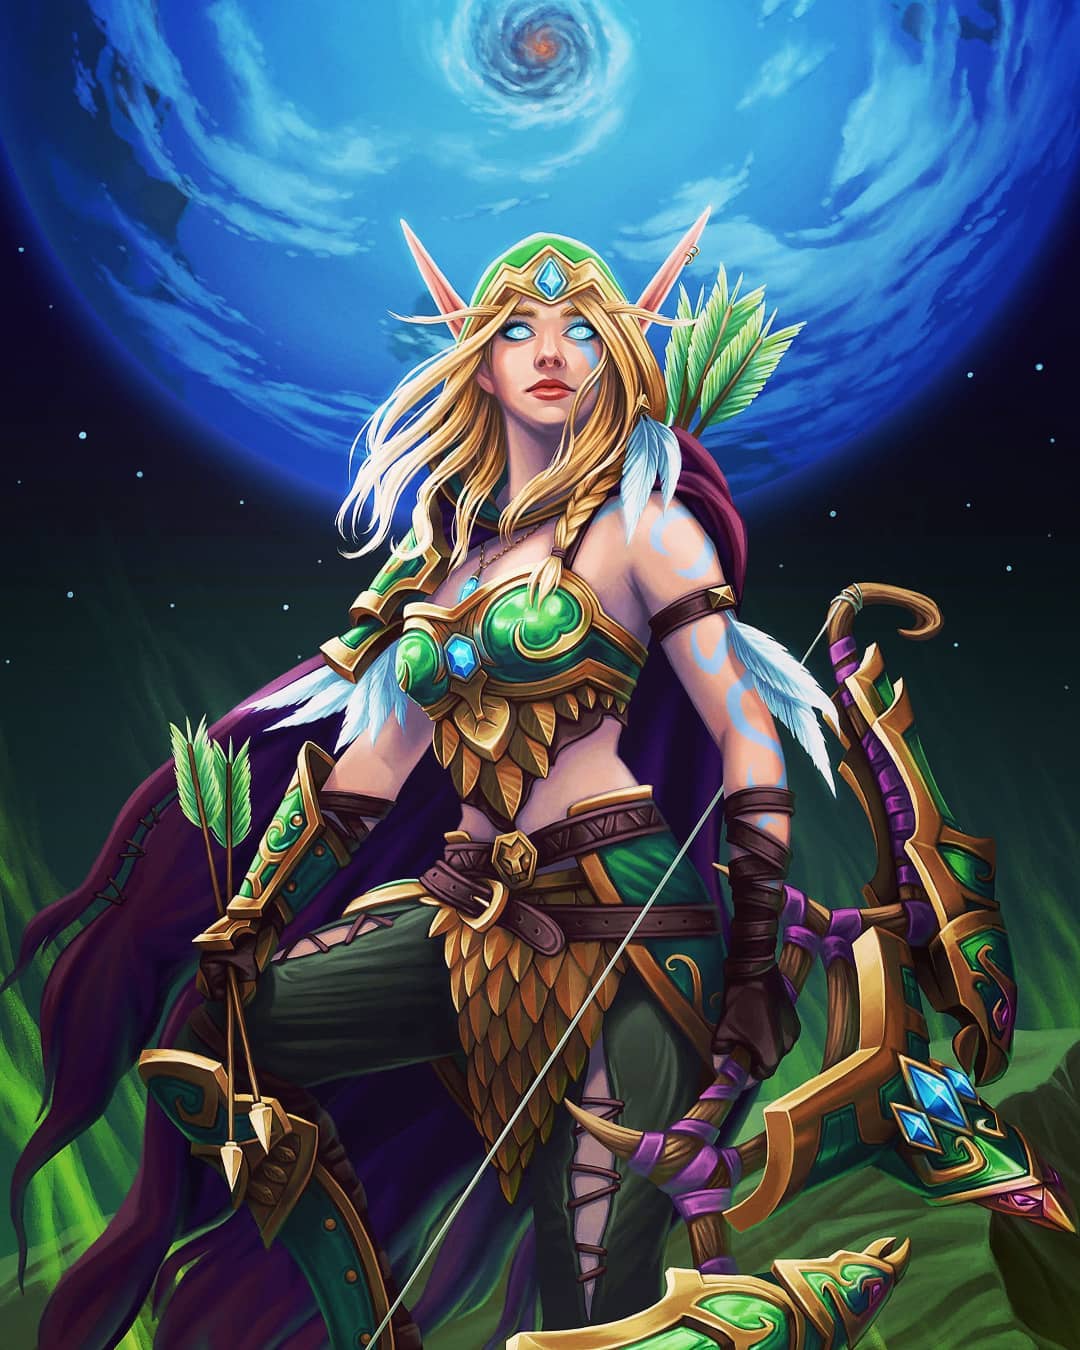 49 Hot Pictures Of Alleria Windrunner From World Of Warcraft Will Make Every Fan’s Day A Win | Best Of Comic Books